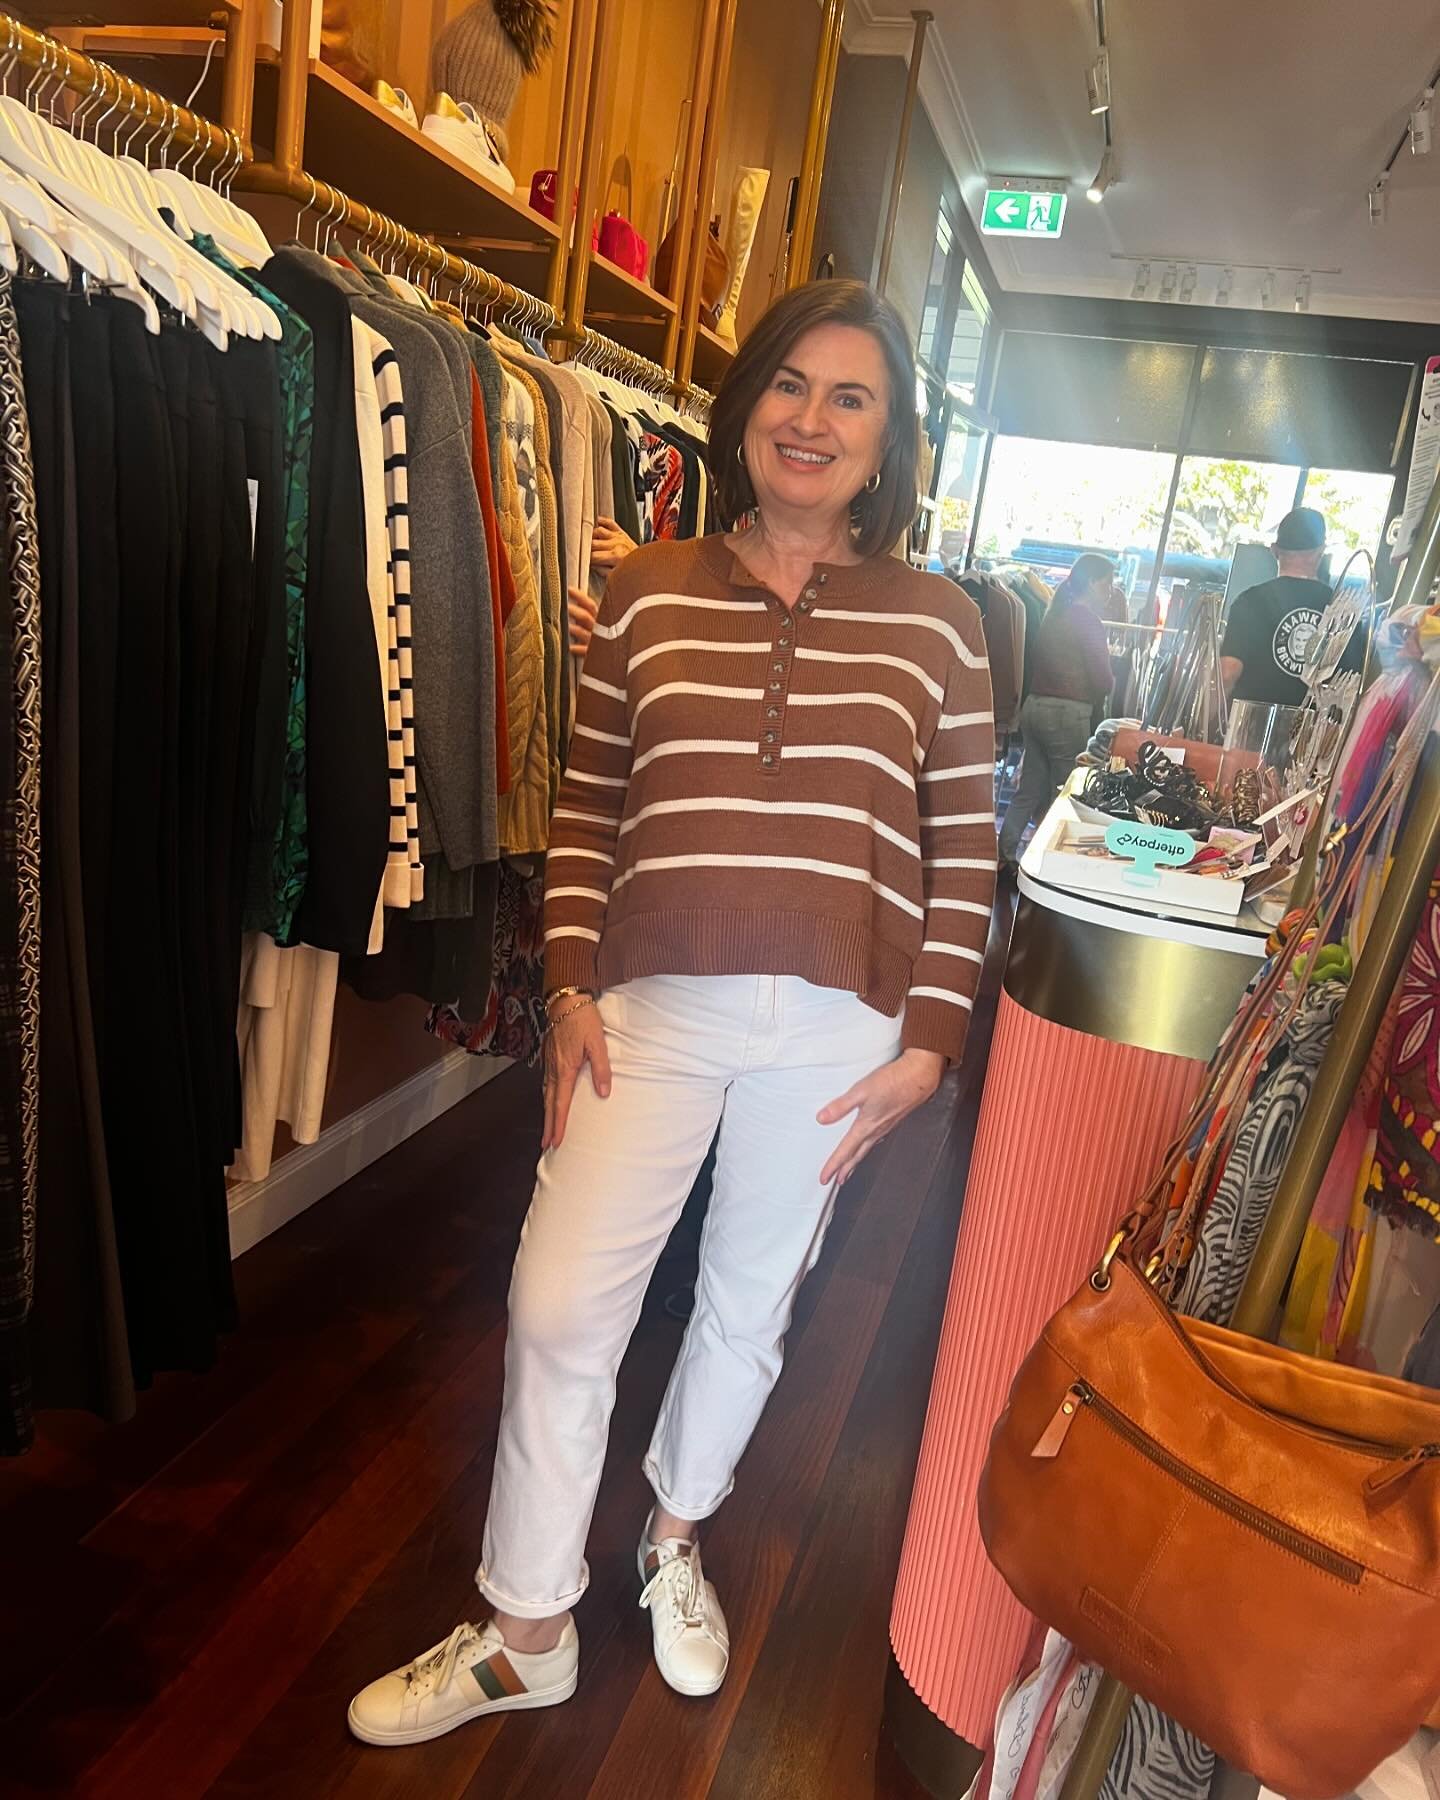 Gerri pulls off the effortless style with the perfect blend of comfort and class with her Maxted Brenton Henley jumper and Kireina Rose jeans. 

Crazy Saturdays in store requires comfort and confidence.
How good does she look? 

#casualchicgoals #cas